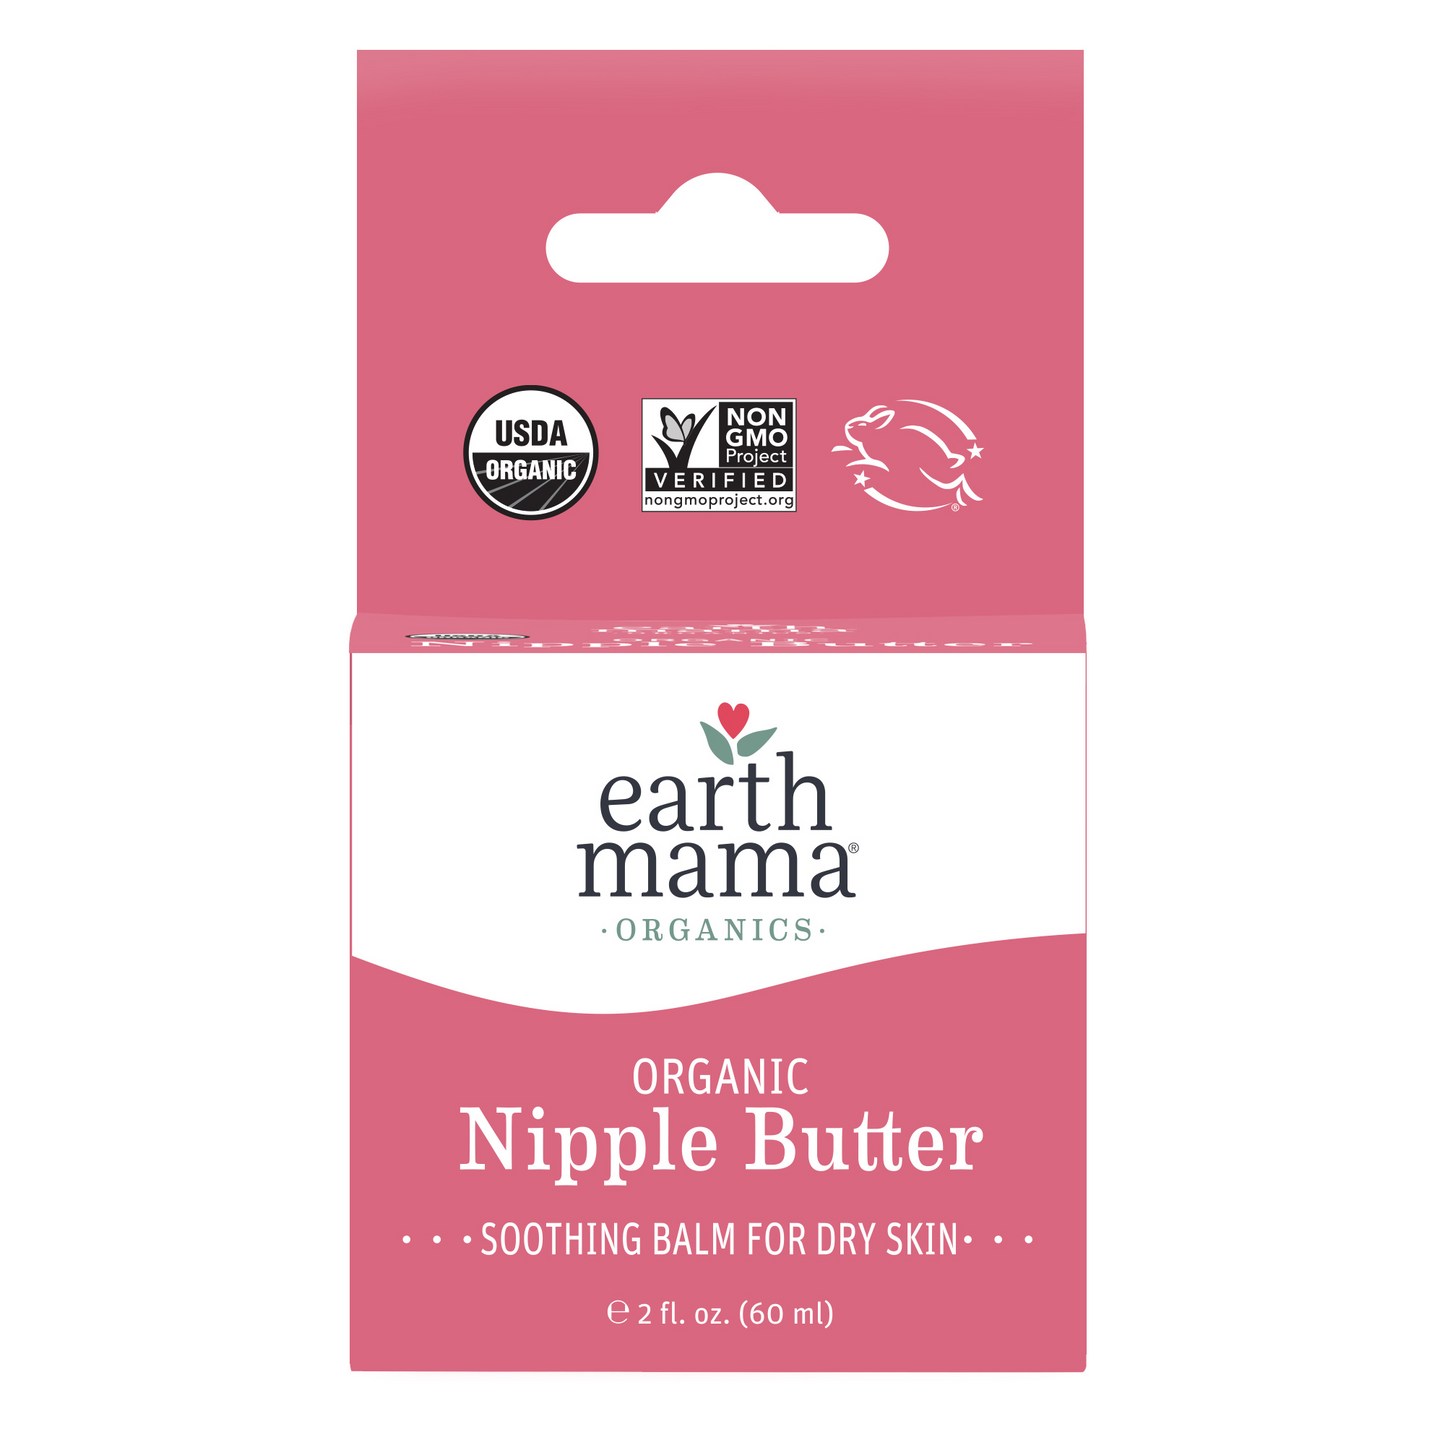 Primary image of Organic Nipple Butter